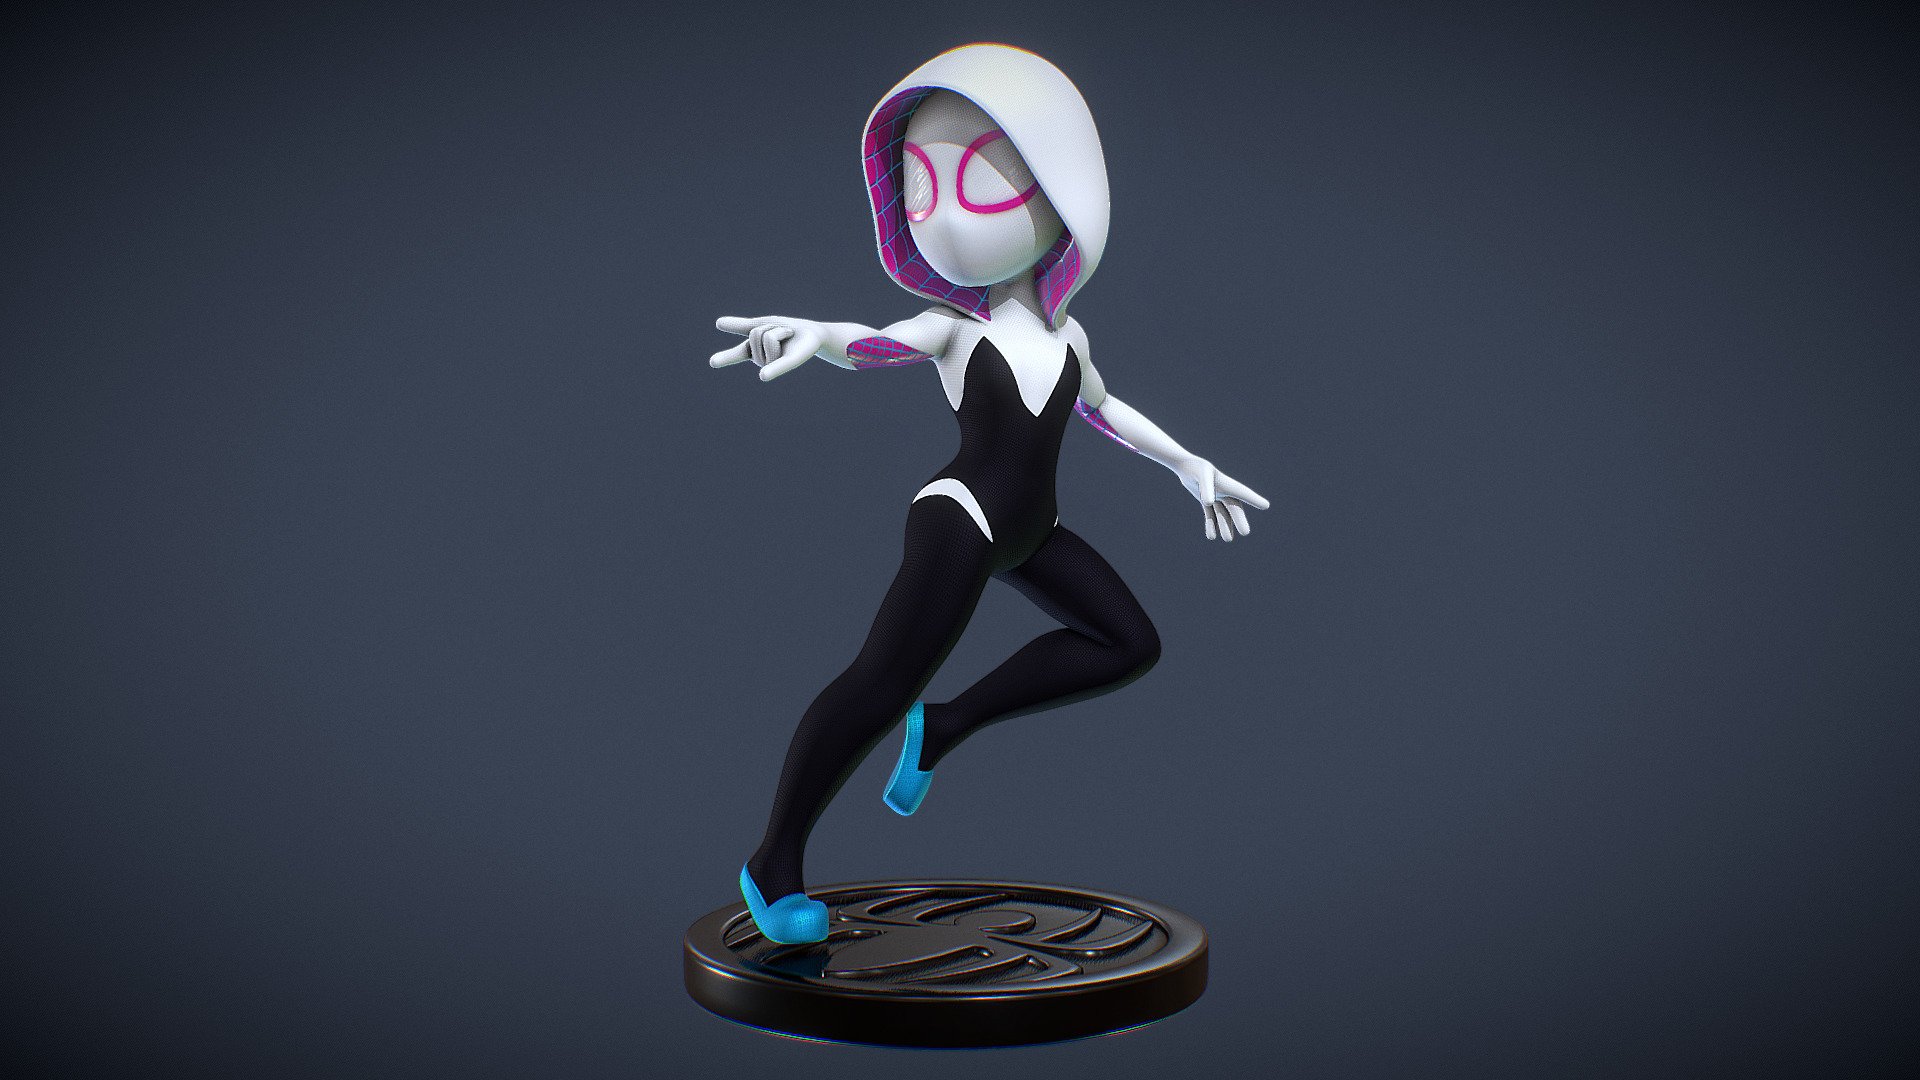 This is a lower poly version of a Spider Gwen figurine I made for 3d printing. This was my first experience with creating a model for 3d printing, so I had a lot to learn about what worked and what didn't work.

The high poly printable version is available for download here: https://sketchfab.com/3d-models/spider-gwen-figurine-hi-poly-printable-version-628e294e643d42c2af025475b955b607 - Spider Gwen Figurine - 3D model by Brandon Shirk (@ShirkBrandon) 3d model